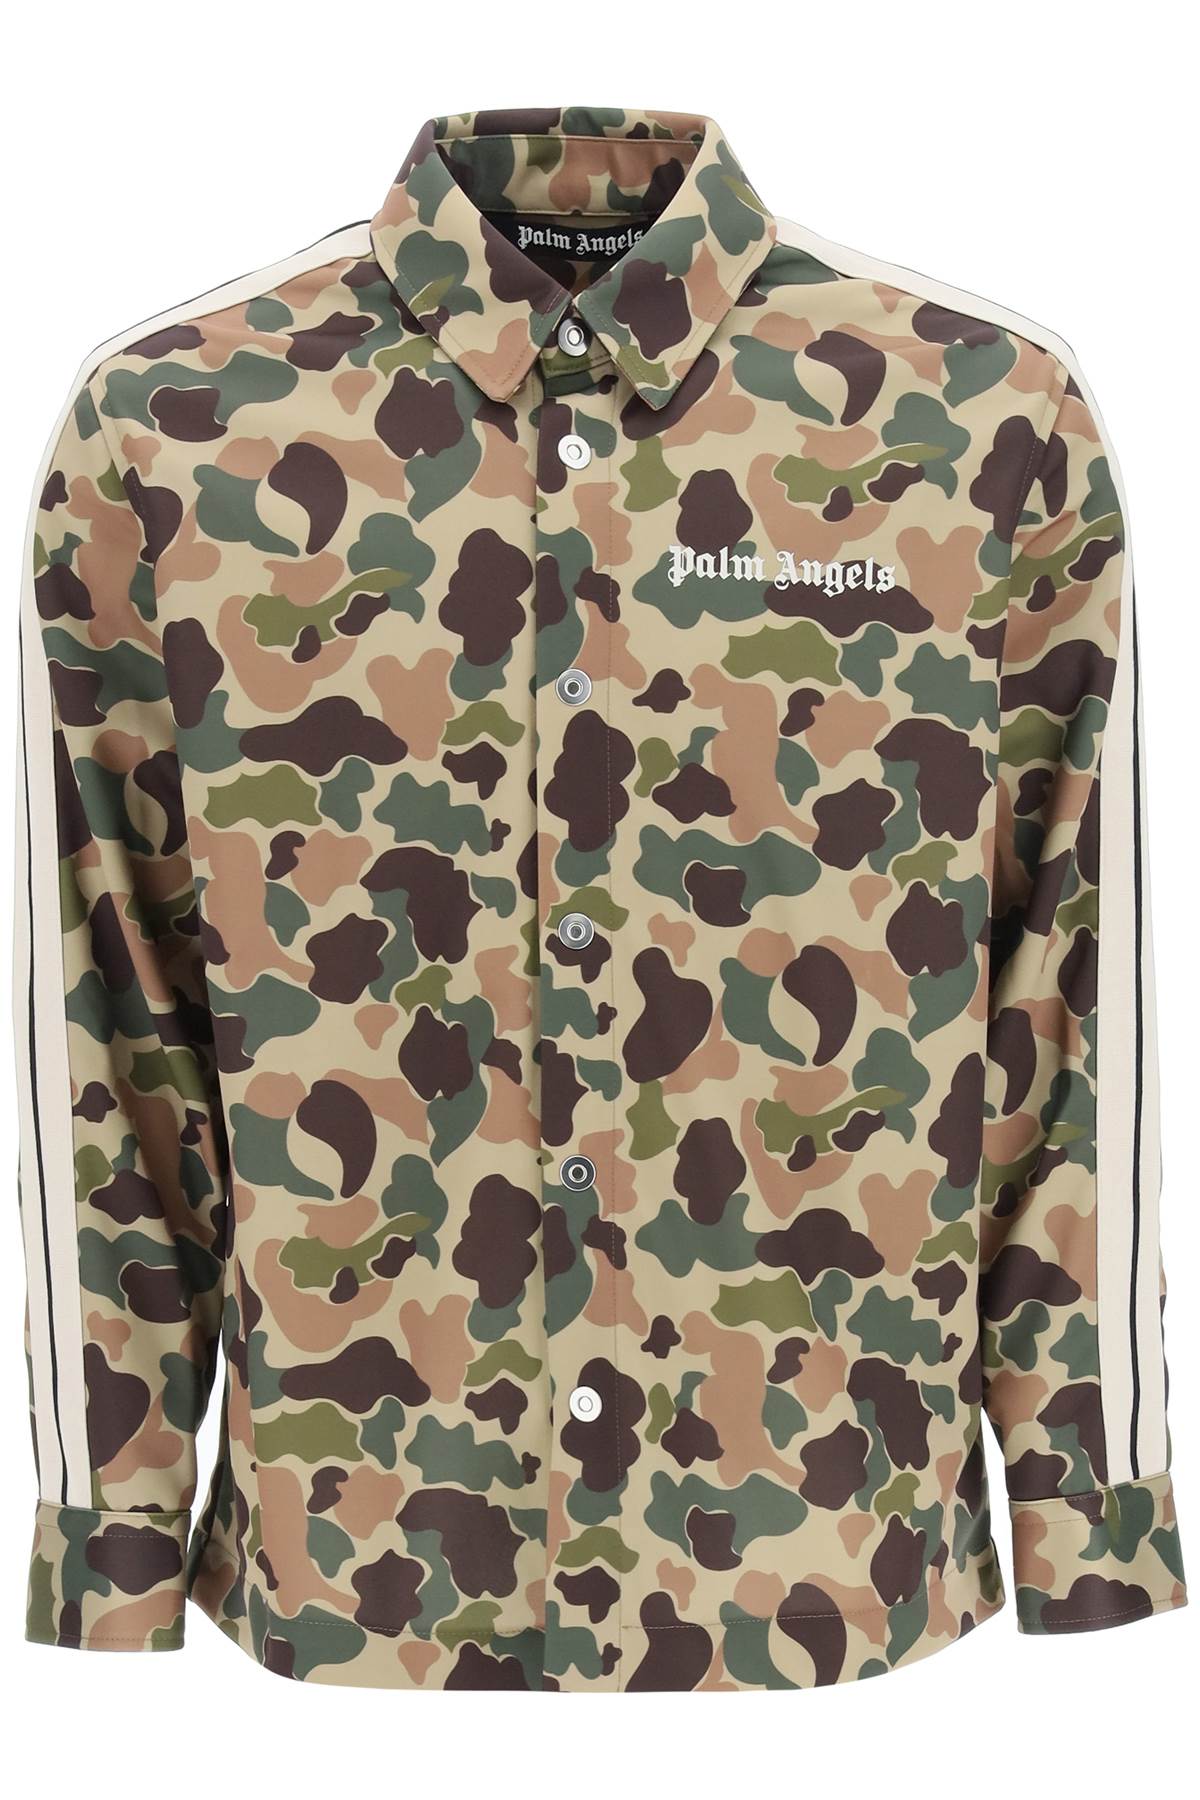 Palm Angels Camo Shirt With Bands